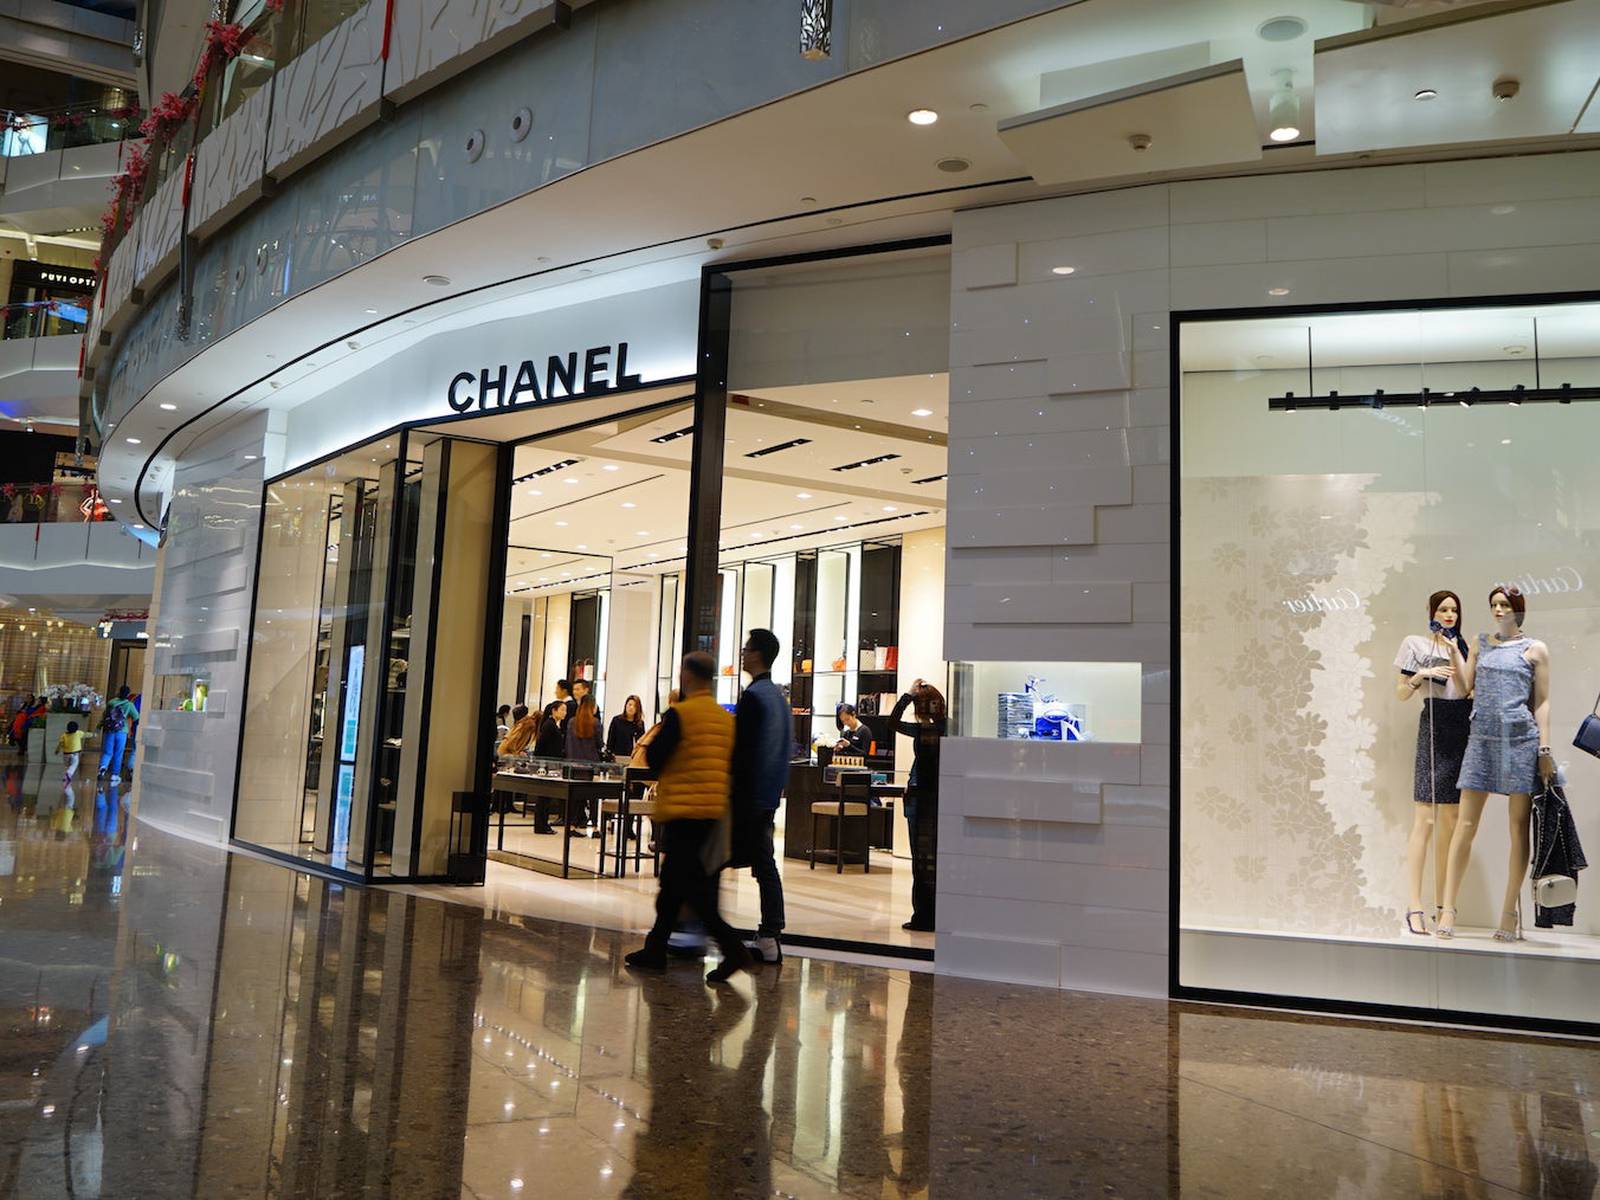 New Ranking Shows Chanel is Favourite Brand of Wealthy Chinese